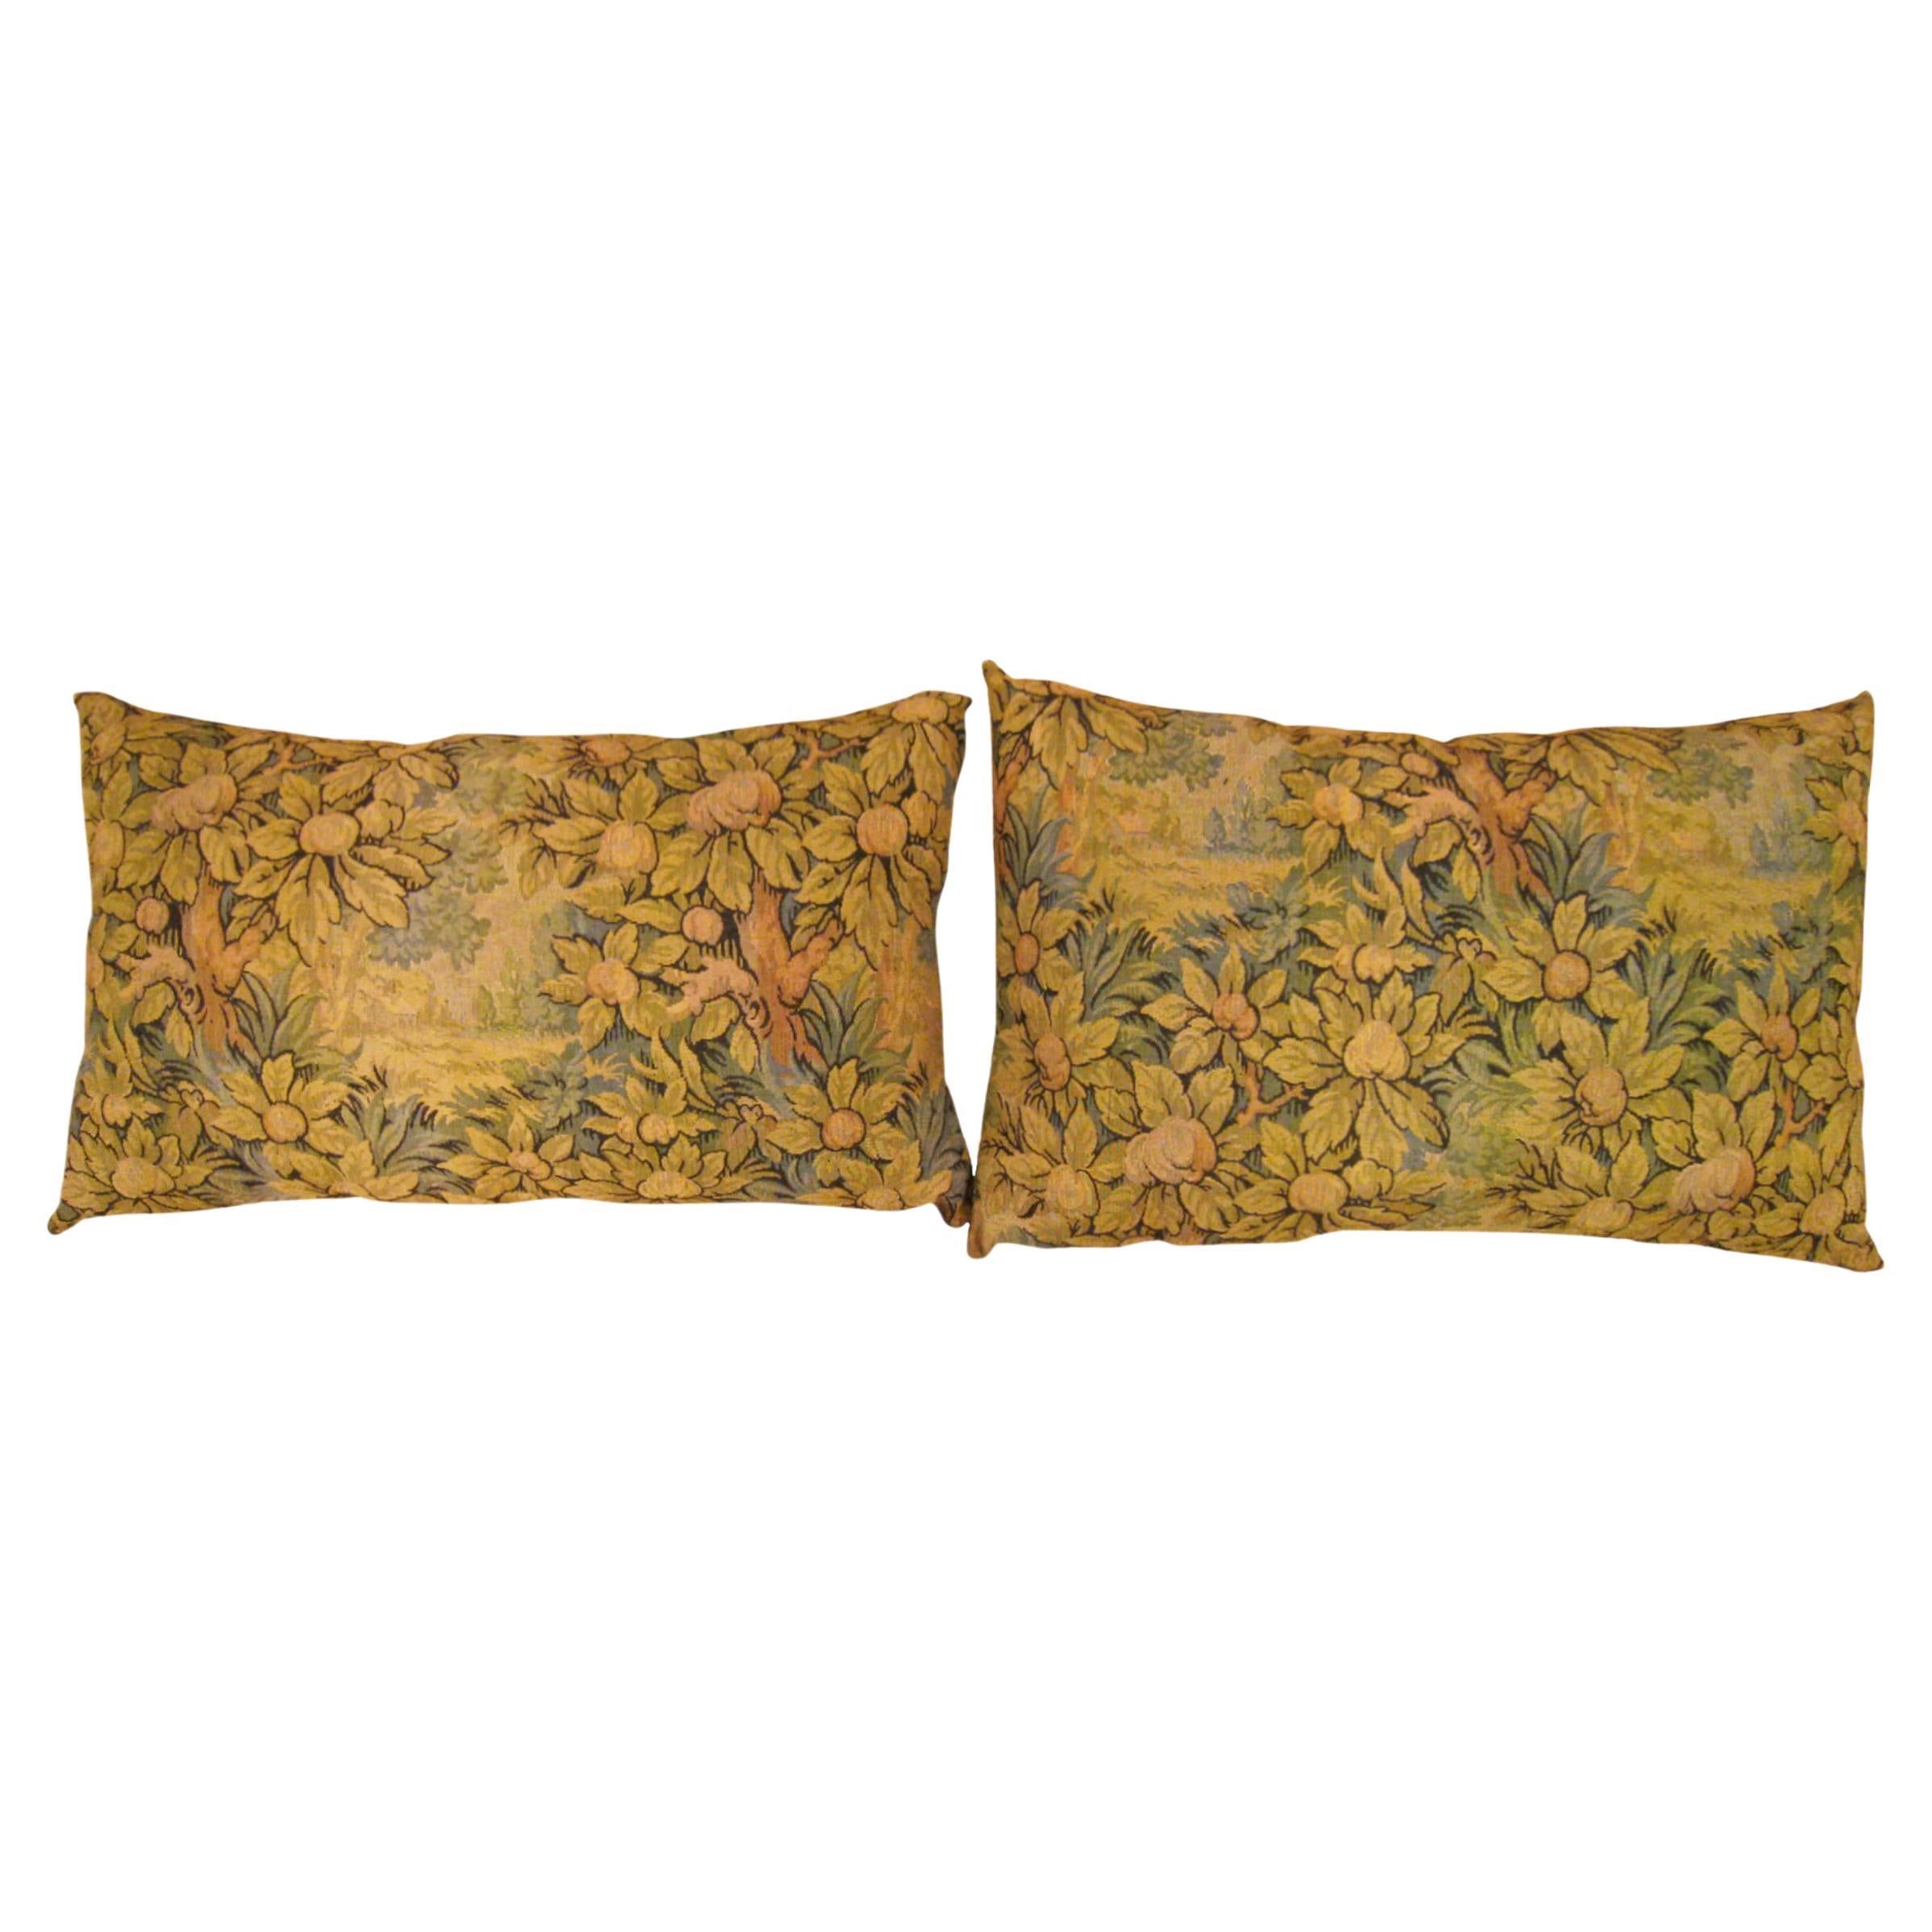 Pair of Decorative Antique Jacquard Tapestry Pillows with Trees Allover For Sale